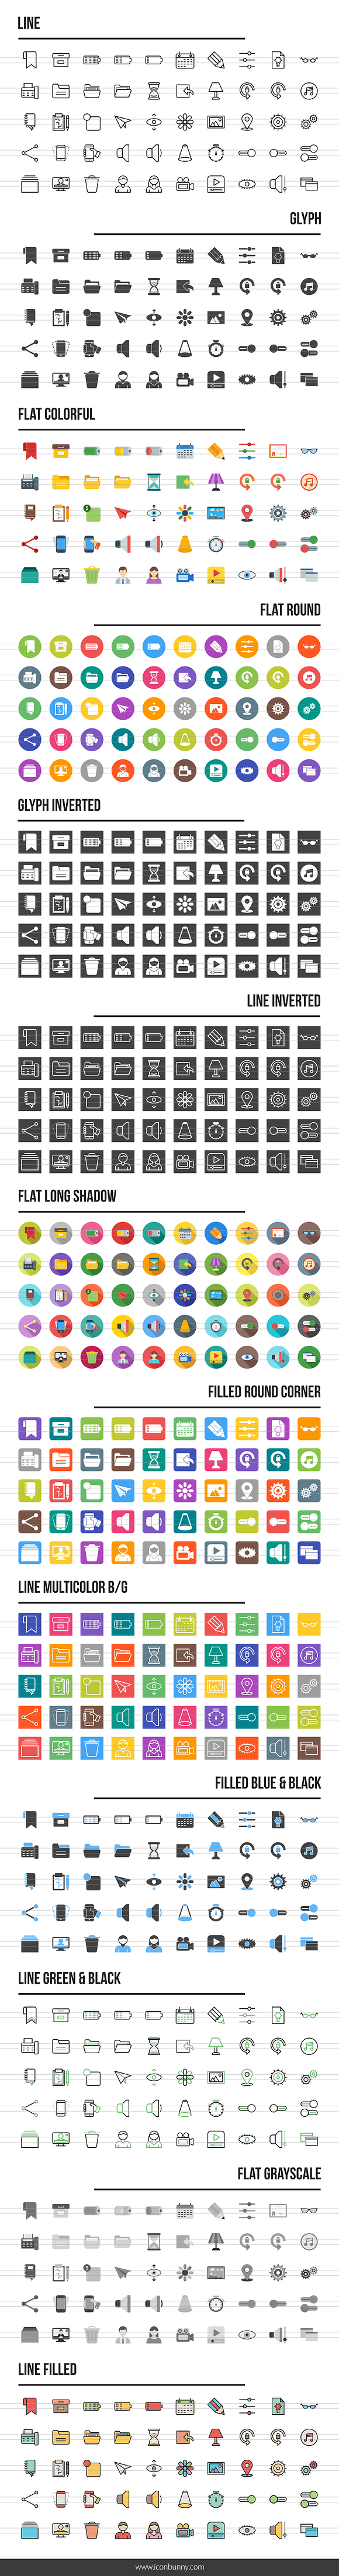 650 Web Interface Icons in Graphics - product preview 1